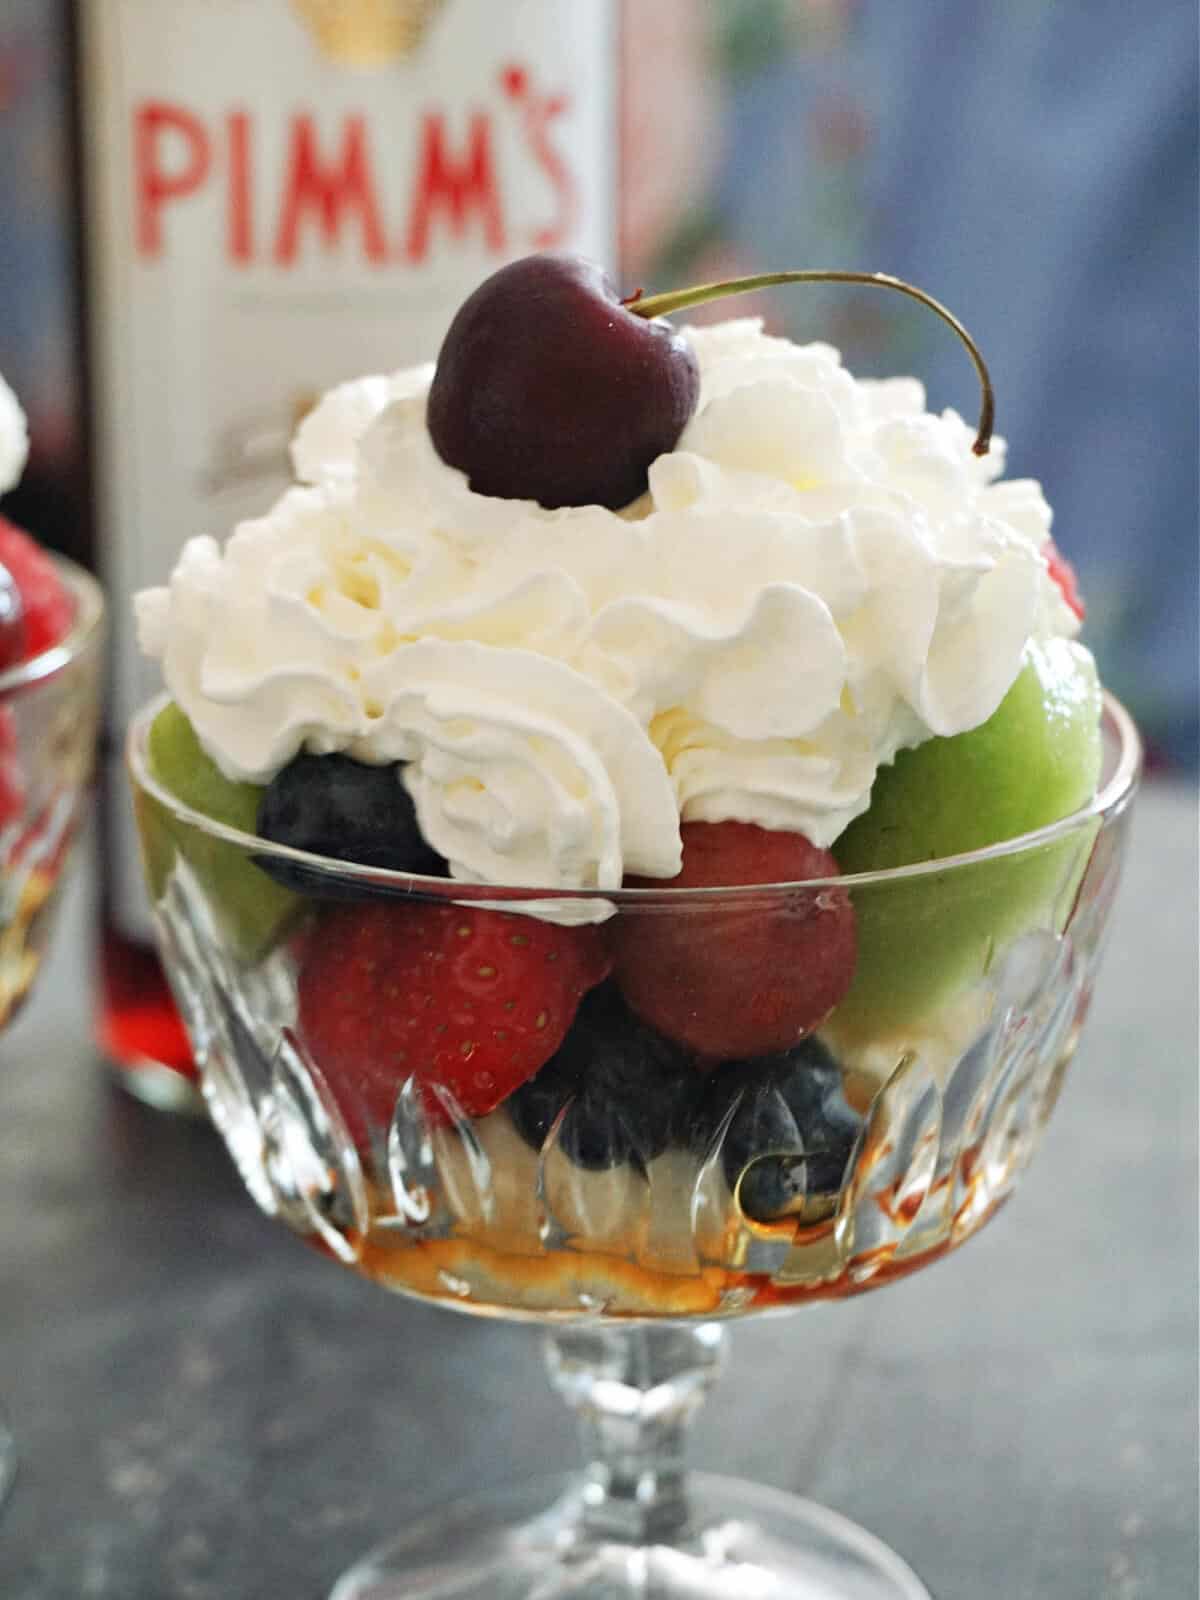 A glass of fruit salad topped with squirty cream and a cherry with a bottle of Pimm's in the background